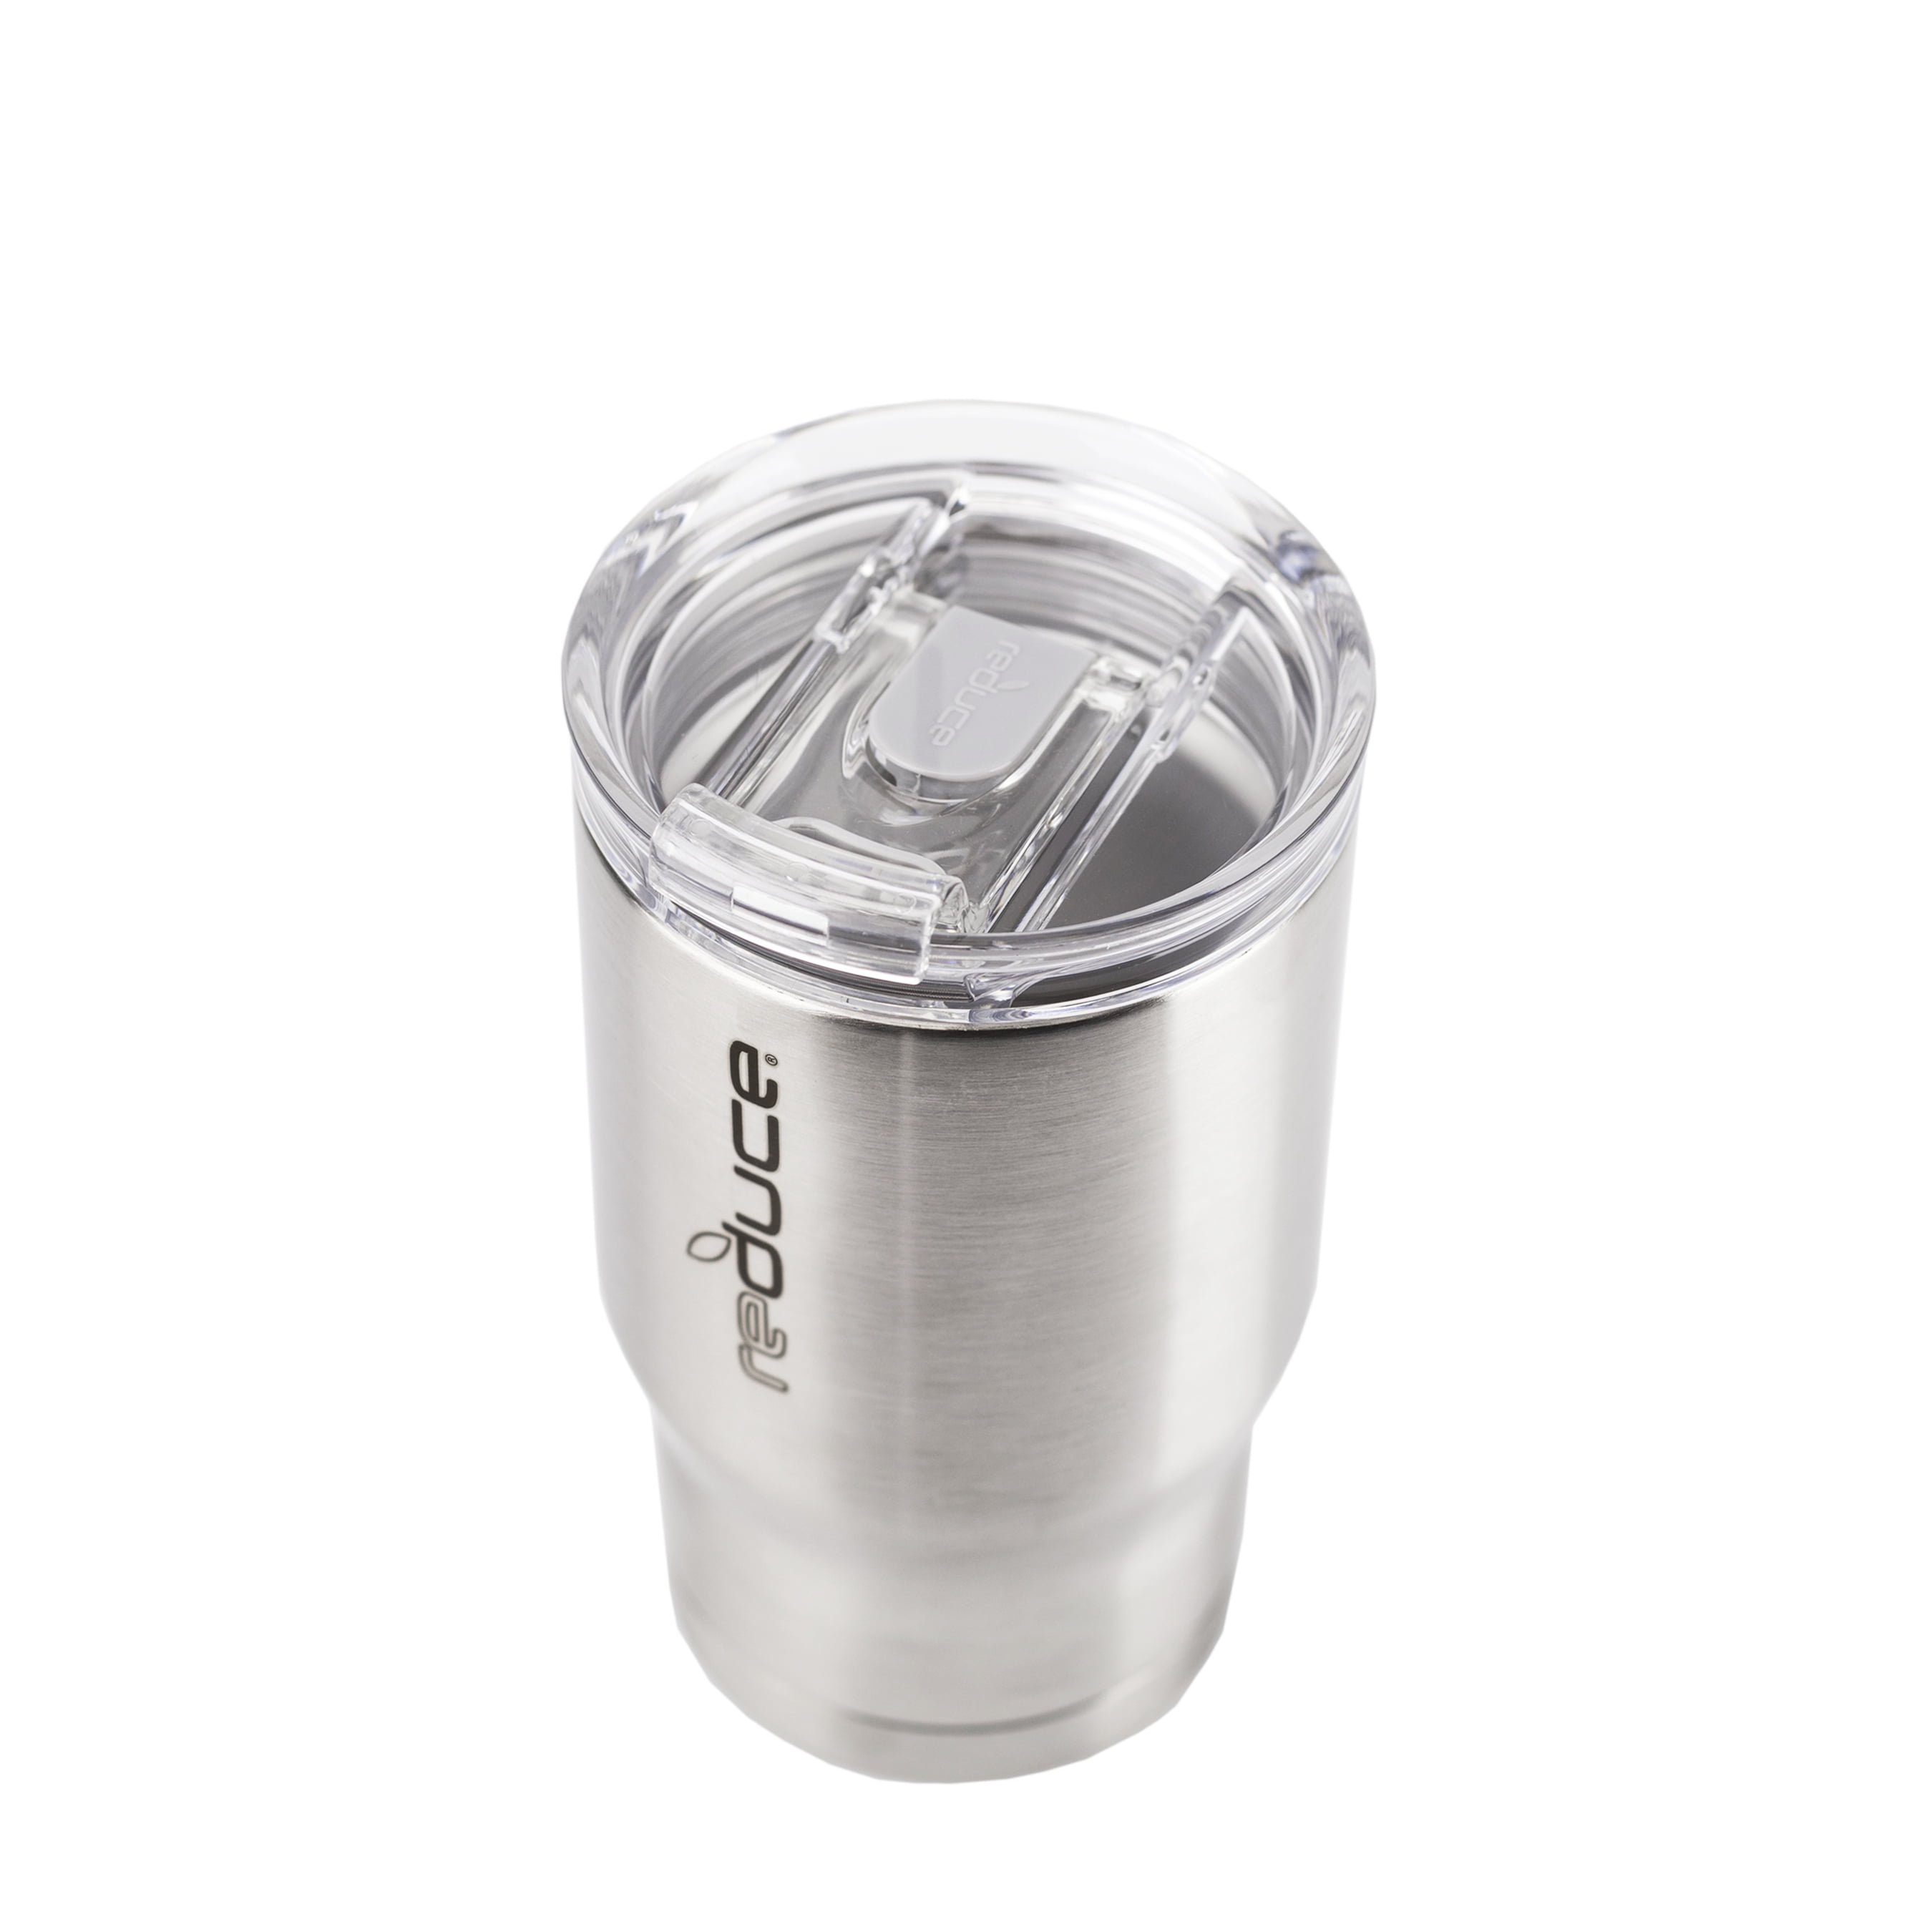 Reduce 14 oz Coldee Tumbler – Reusable Vacuum Insulated Stainless Steel Cup  with Straw and Lid – Sma…See more Reduce 14 oz Coldee Tumbler – Reusable